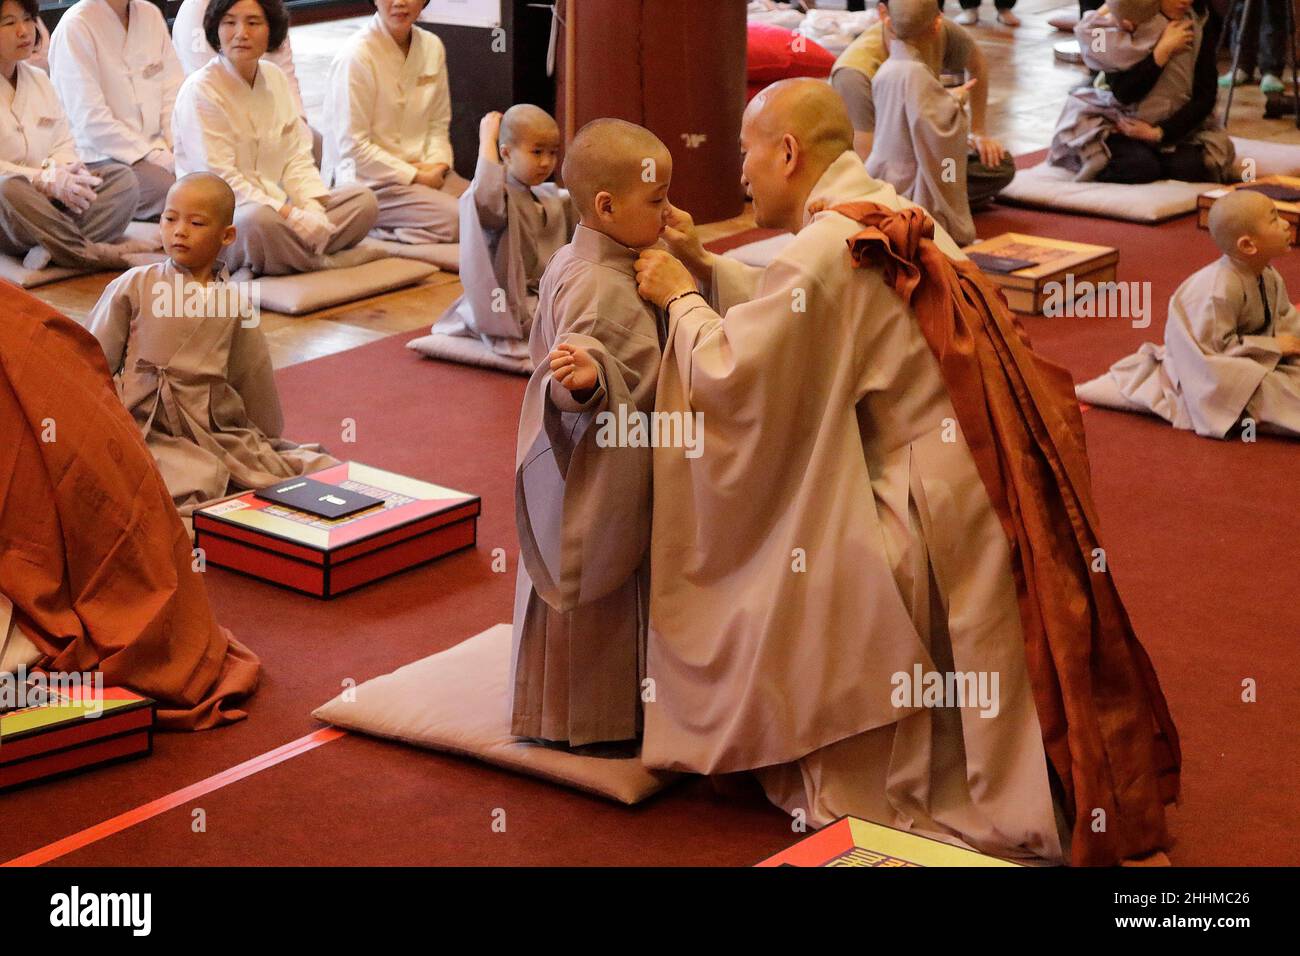 May 2, 2018-Seoul, South Korea-A child gets his head shaved by a Buddhist monk during the 'Children Becoming Buddhist Monks' ceremony forthcoming buddha's birthday at a Chogye temple in Seoul, South Korea. Children have their hair shaved off during the 'Children Becoming Buddhist Monks' ceremony ahead of buddha's birthday at a Chogye temple. The children will stay at the temple to learn about Buddhism for 20 days. Buddha was born approximately 2,562 years ago, and although the exact date is unknown, Buddha's official birthday is celebrated on the full moon in May in South Korea, which is on Ma Stock Photo